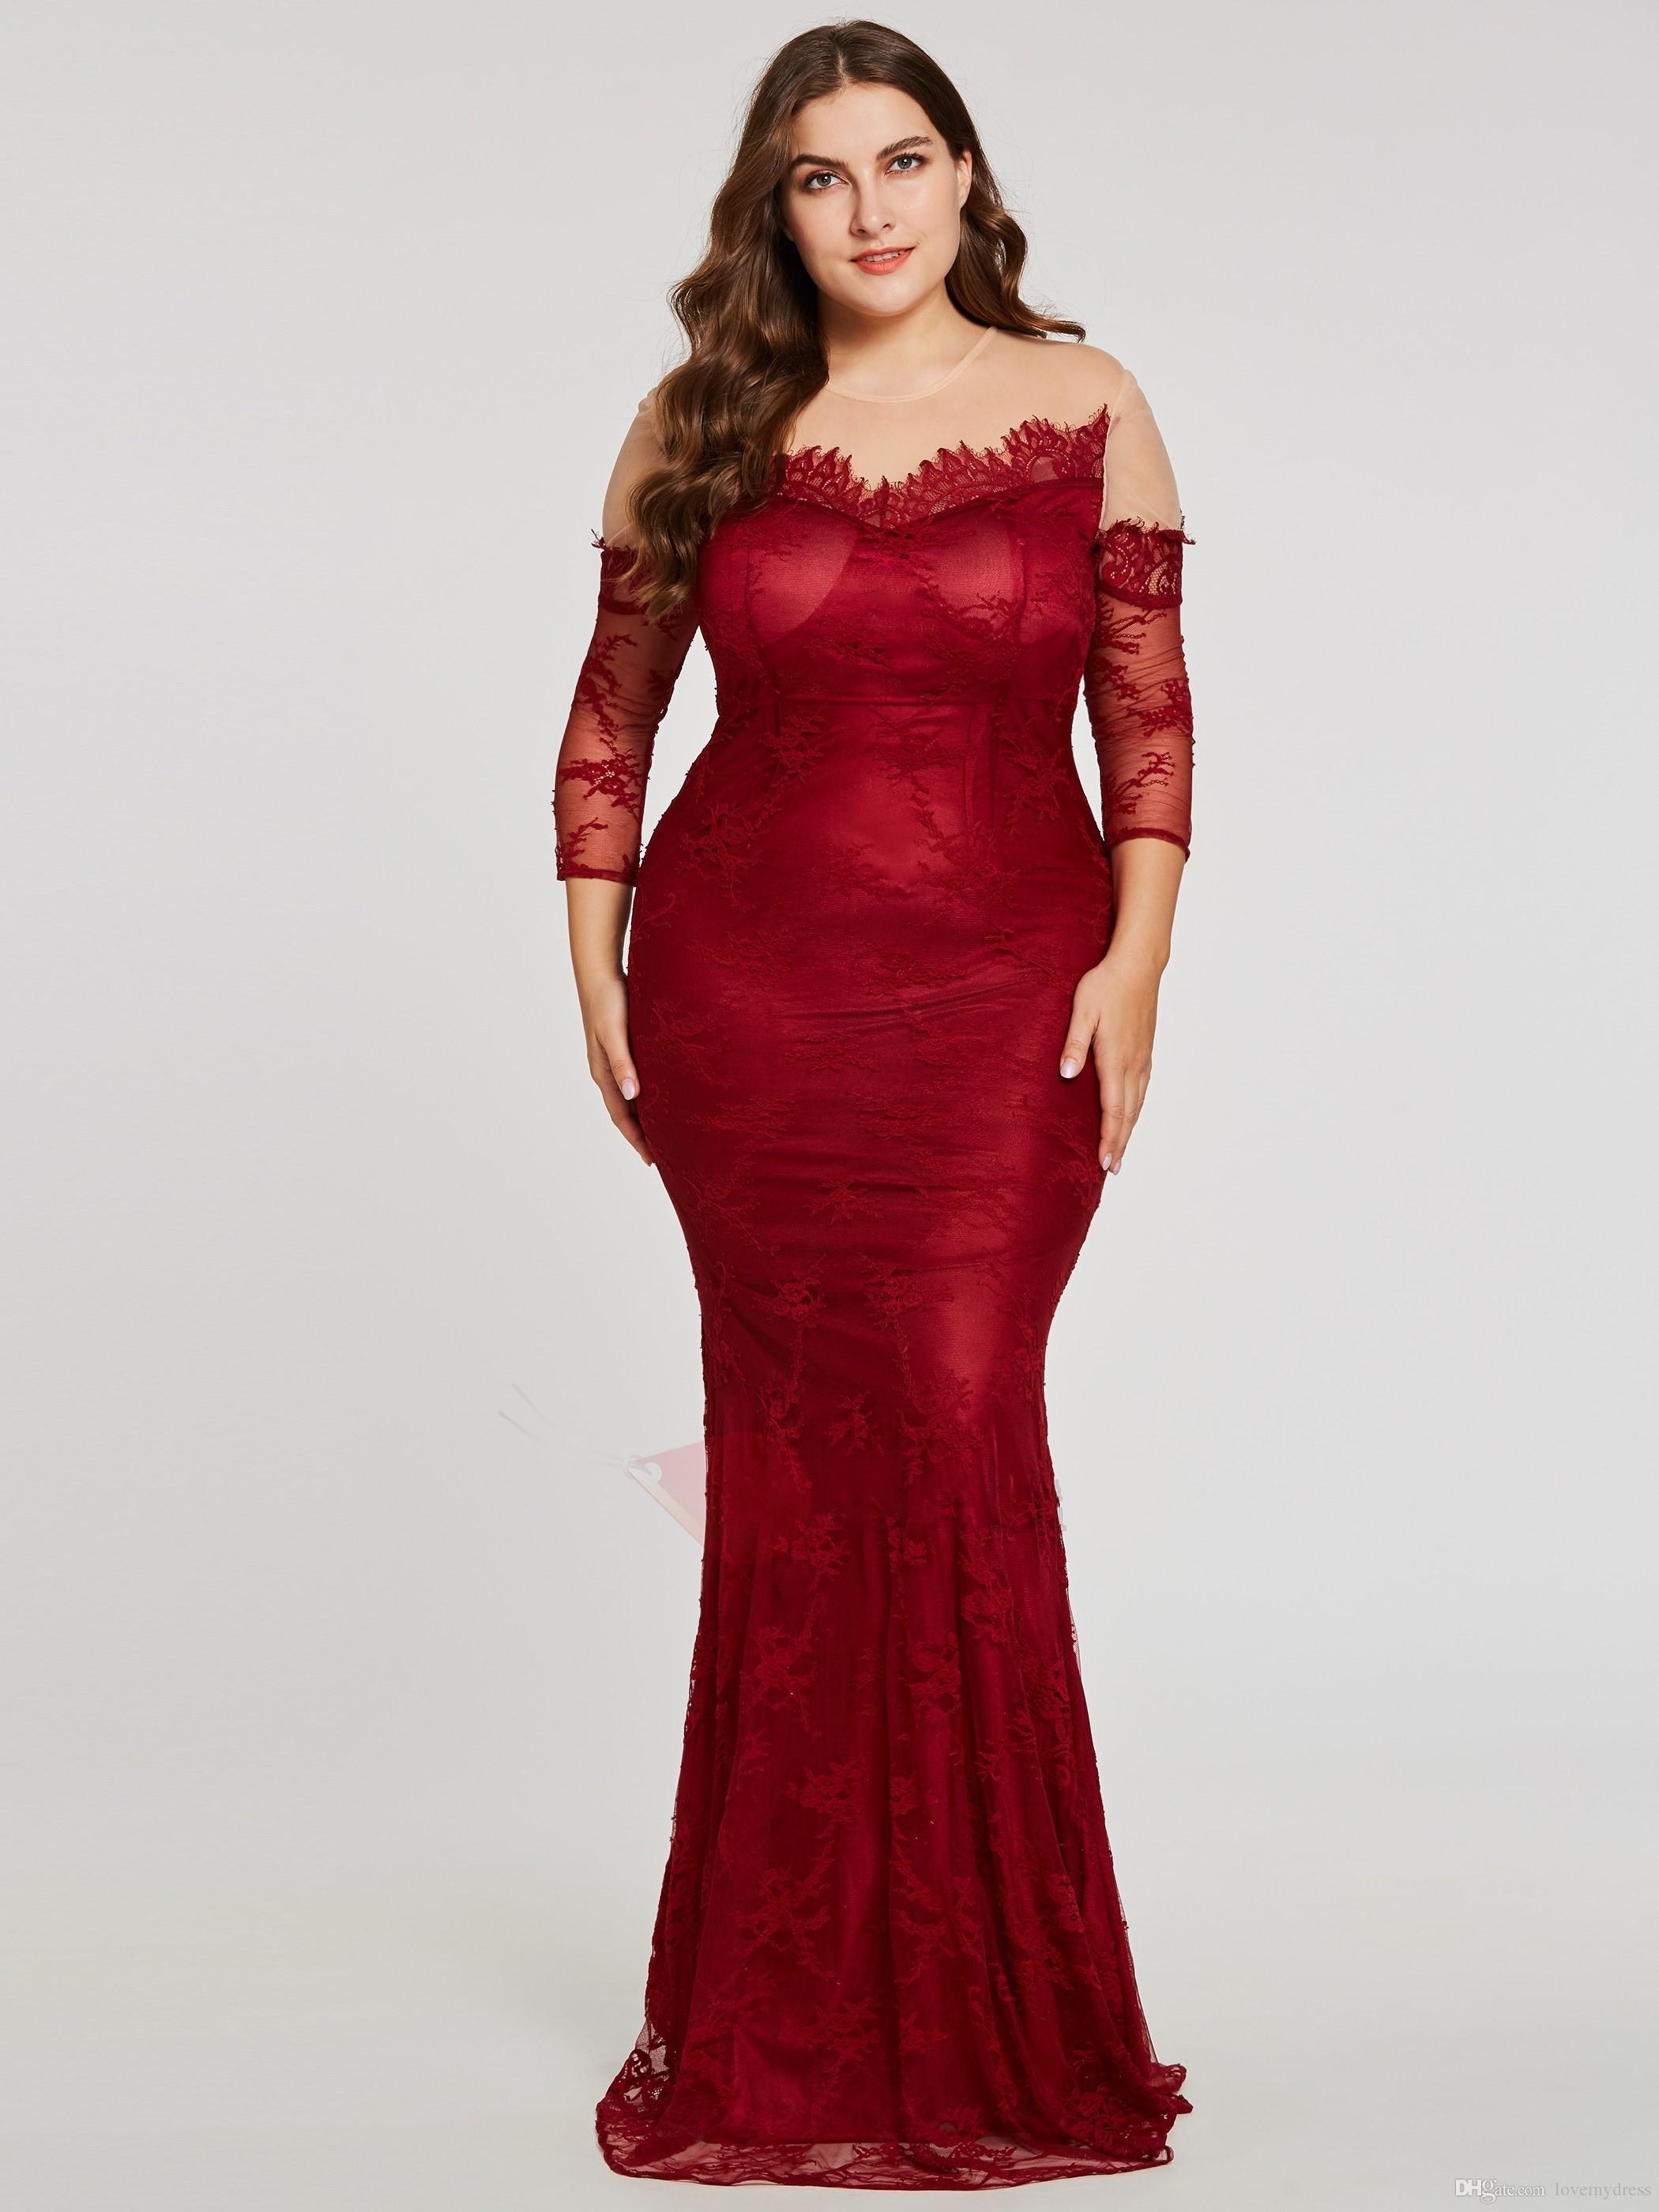 Wine Red Plus Size Special Occasion Dresses For Women Illusion Lace Sleeves  Sheer Neck 2018 Hollow Back Sheath Evening Prom Dress Cheap Maternity  Dresses